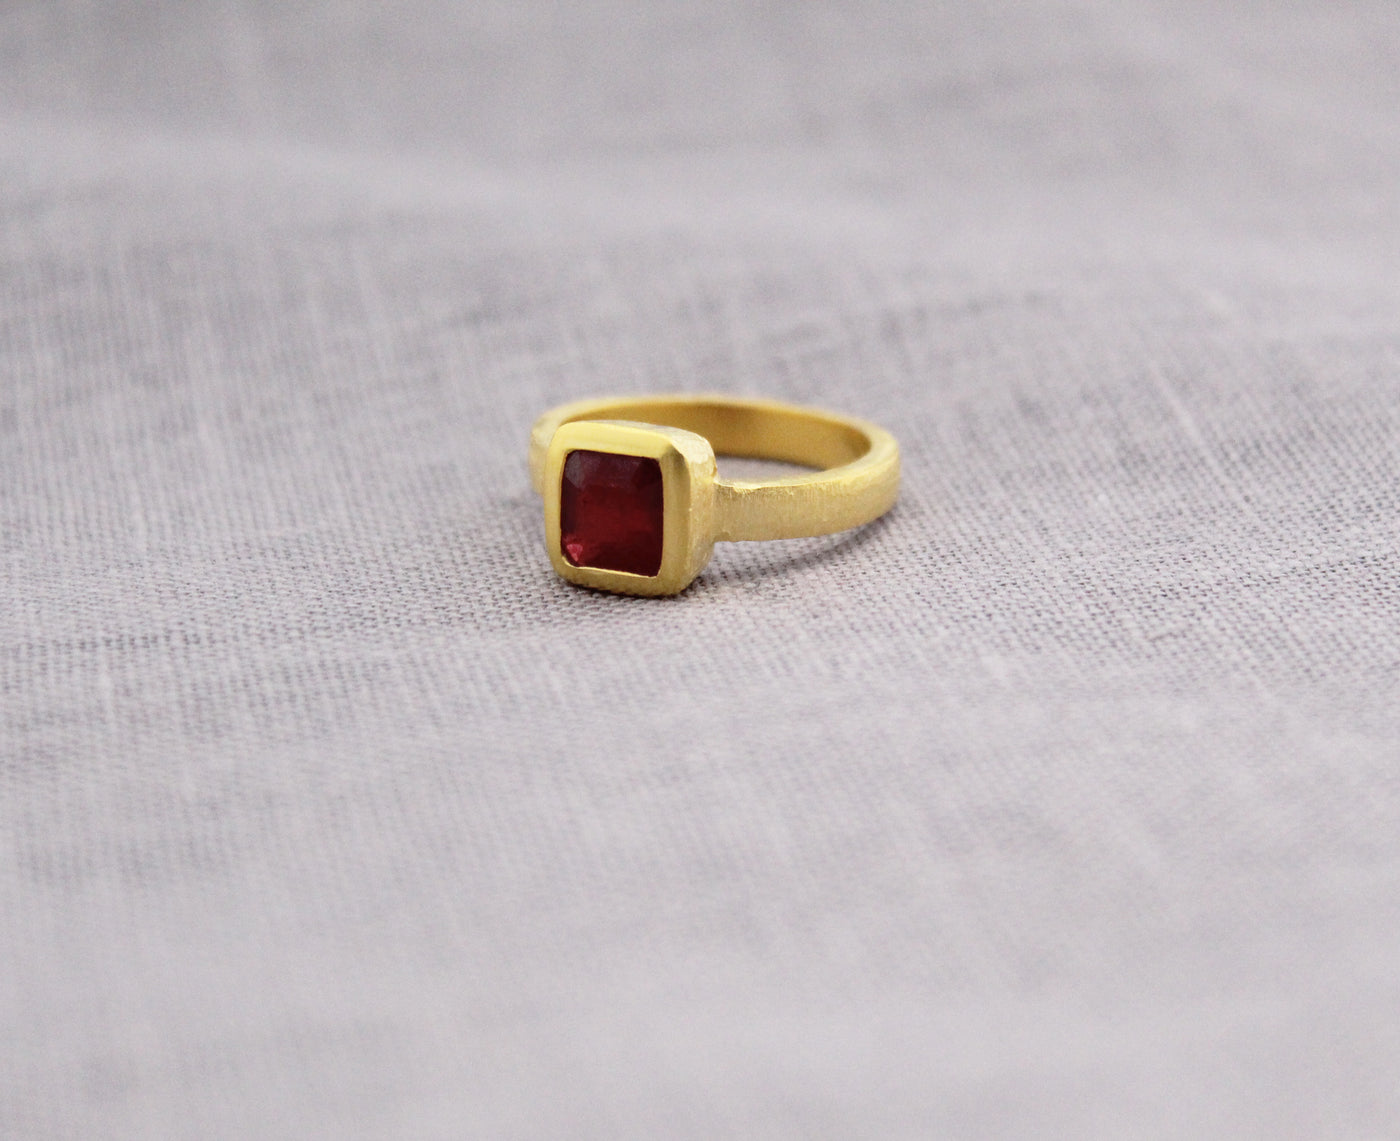 Square Ruby Ring, 18K Gold Filled Ring, Solitaire Ring, Square Faceted Ring, Natural Ruby, Beautiful Ring, Engagement Ring, Wedding Gifts